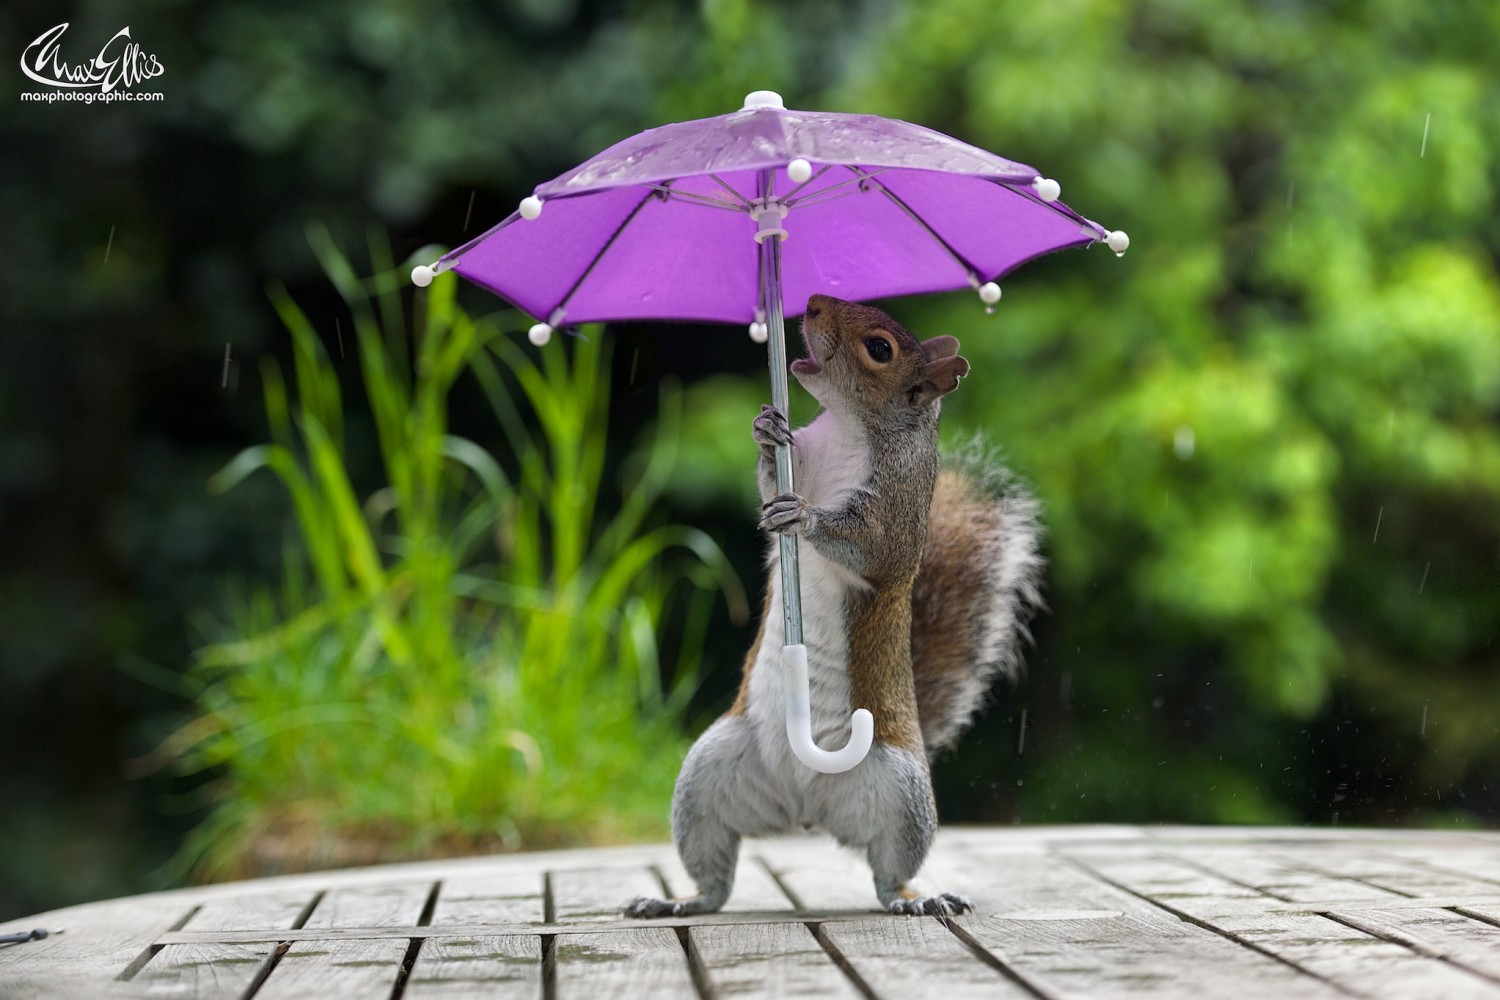 Photographer Gets Squirrel to Pose with a Tiny Umbrella on a Rainy Day